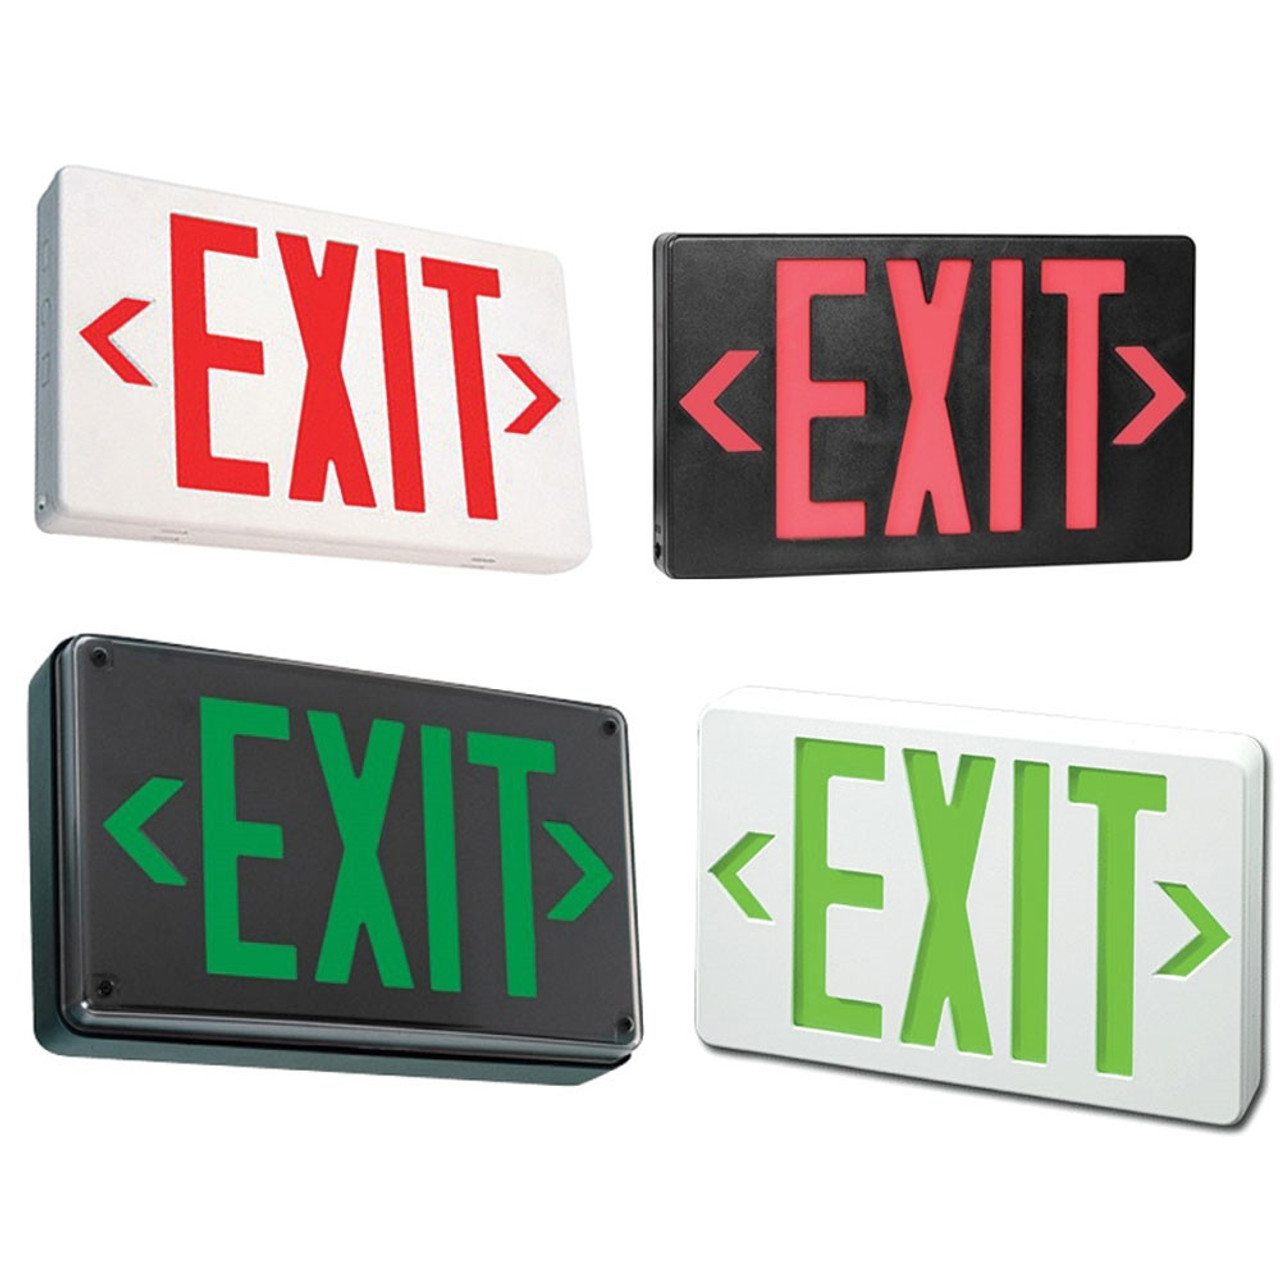 Smallest Compact LED Exit Sign Choose White or Black Housing Color, with  Red or Green Lettering, with or without Battery Back-Up